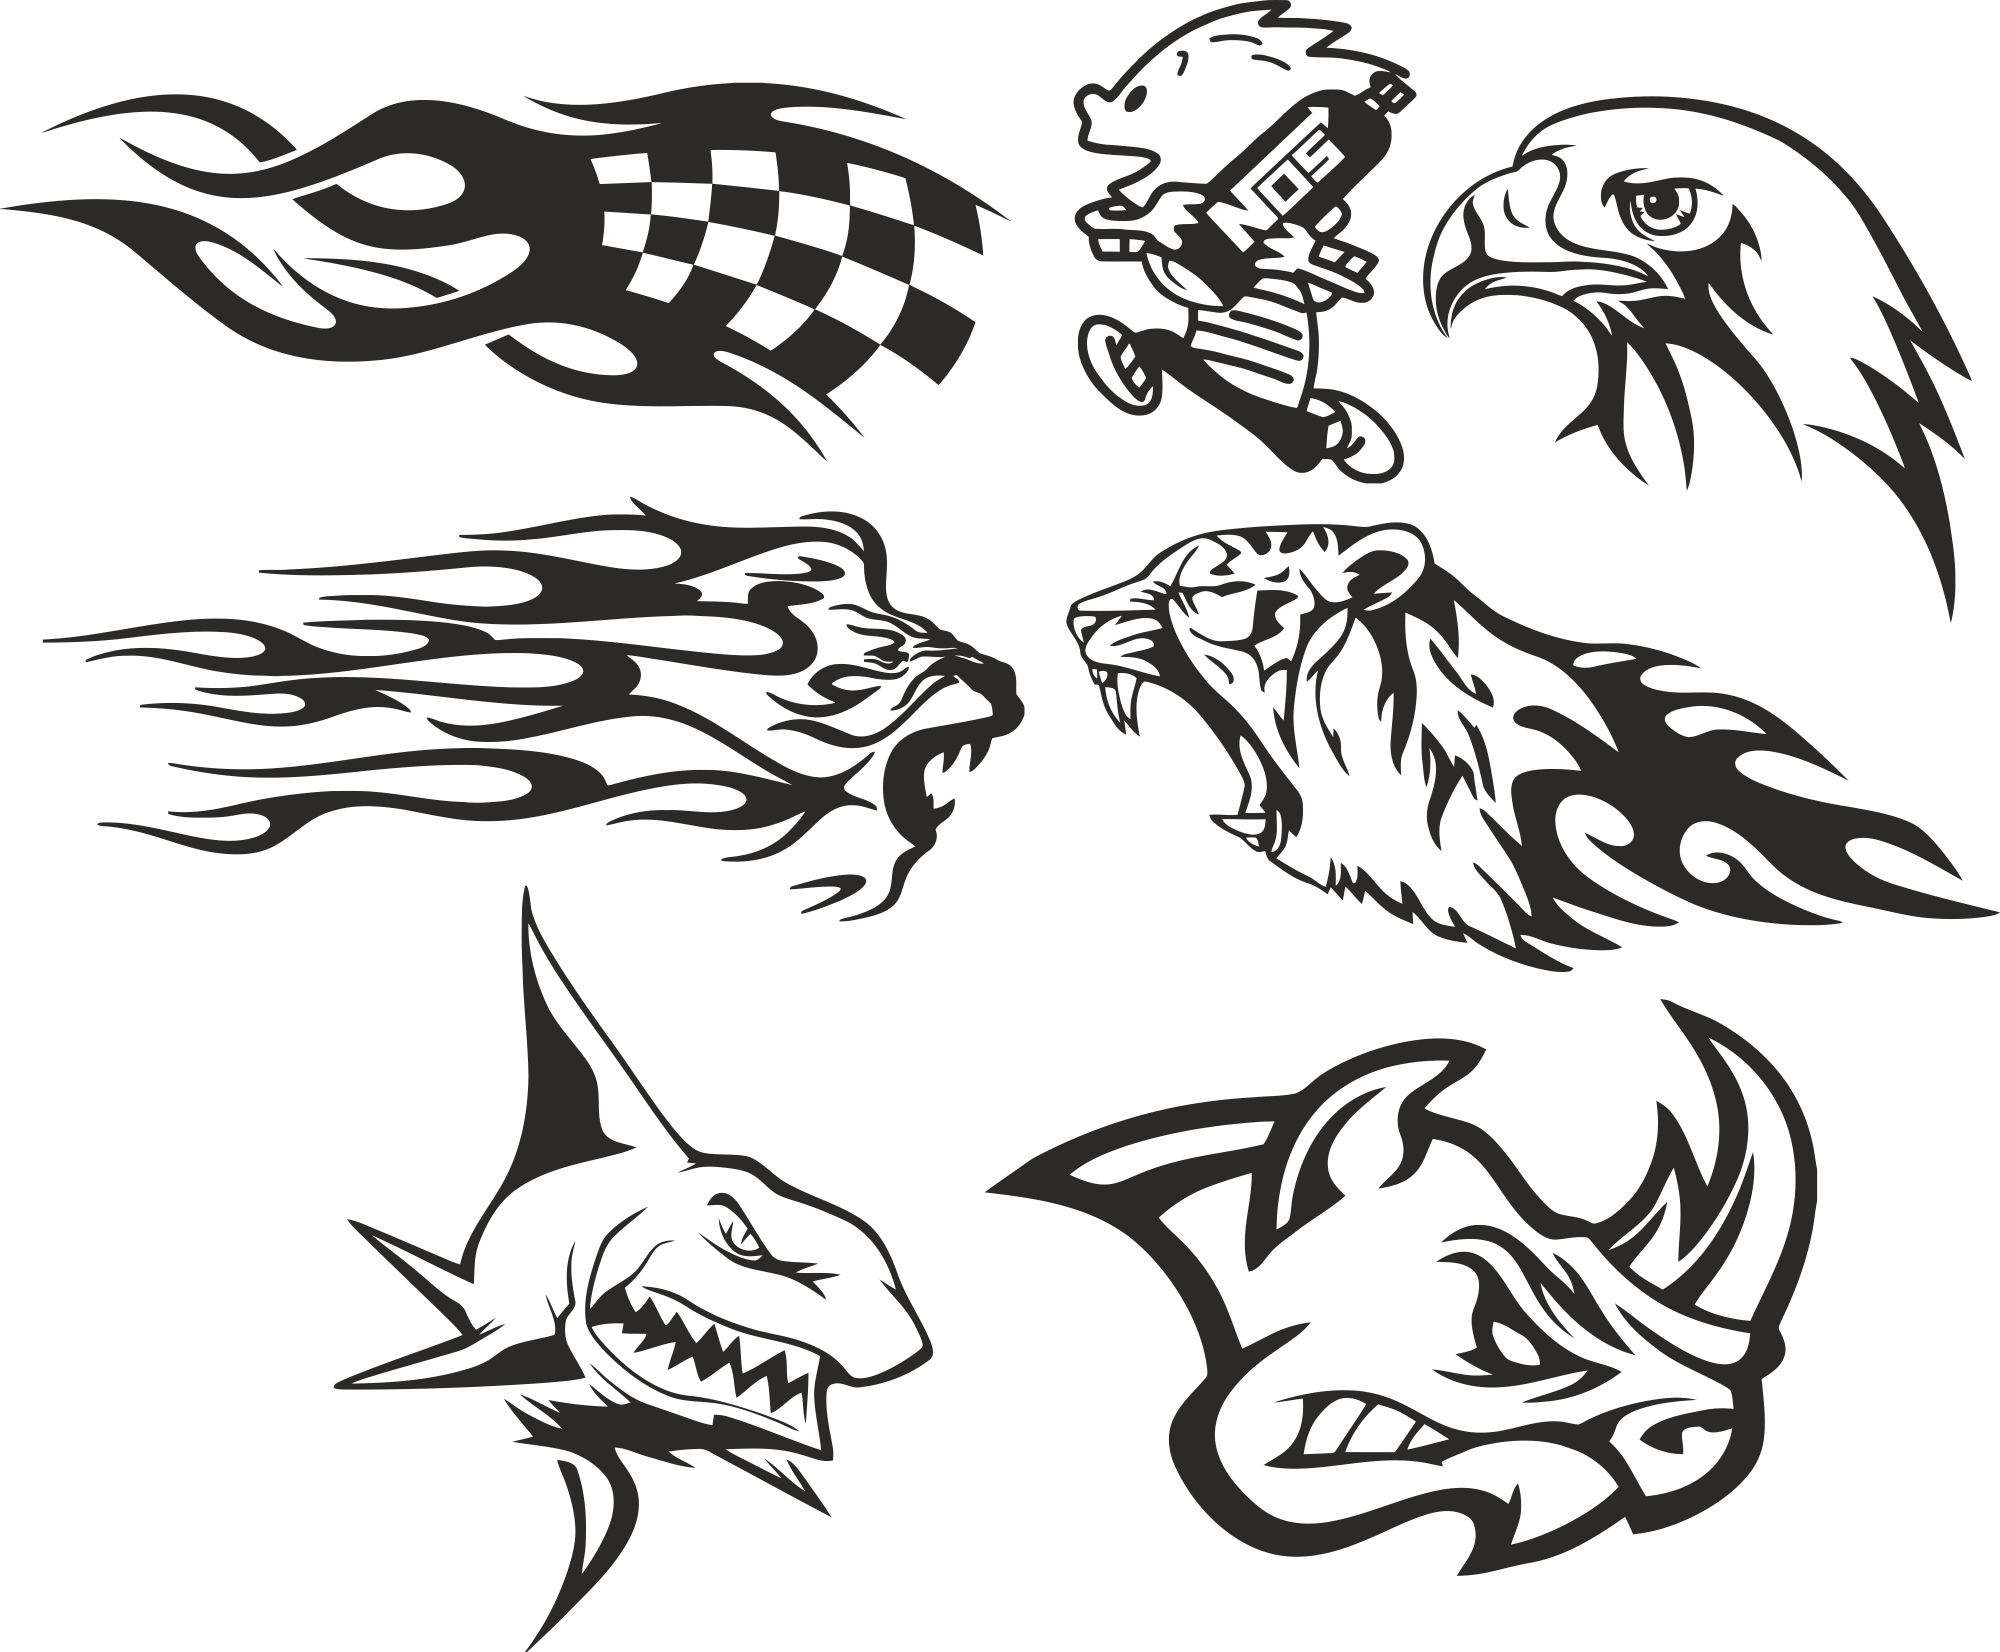 Vinyl Stickers on Car Vector Pack Free Vector cdr Download - 3axis.co